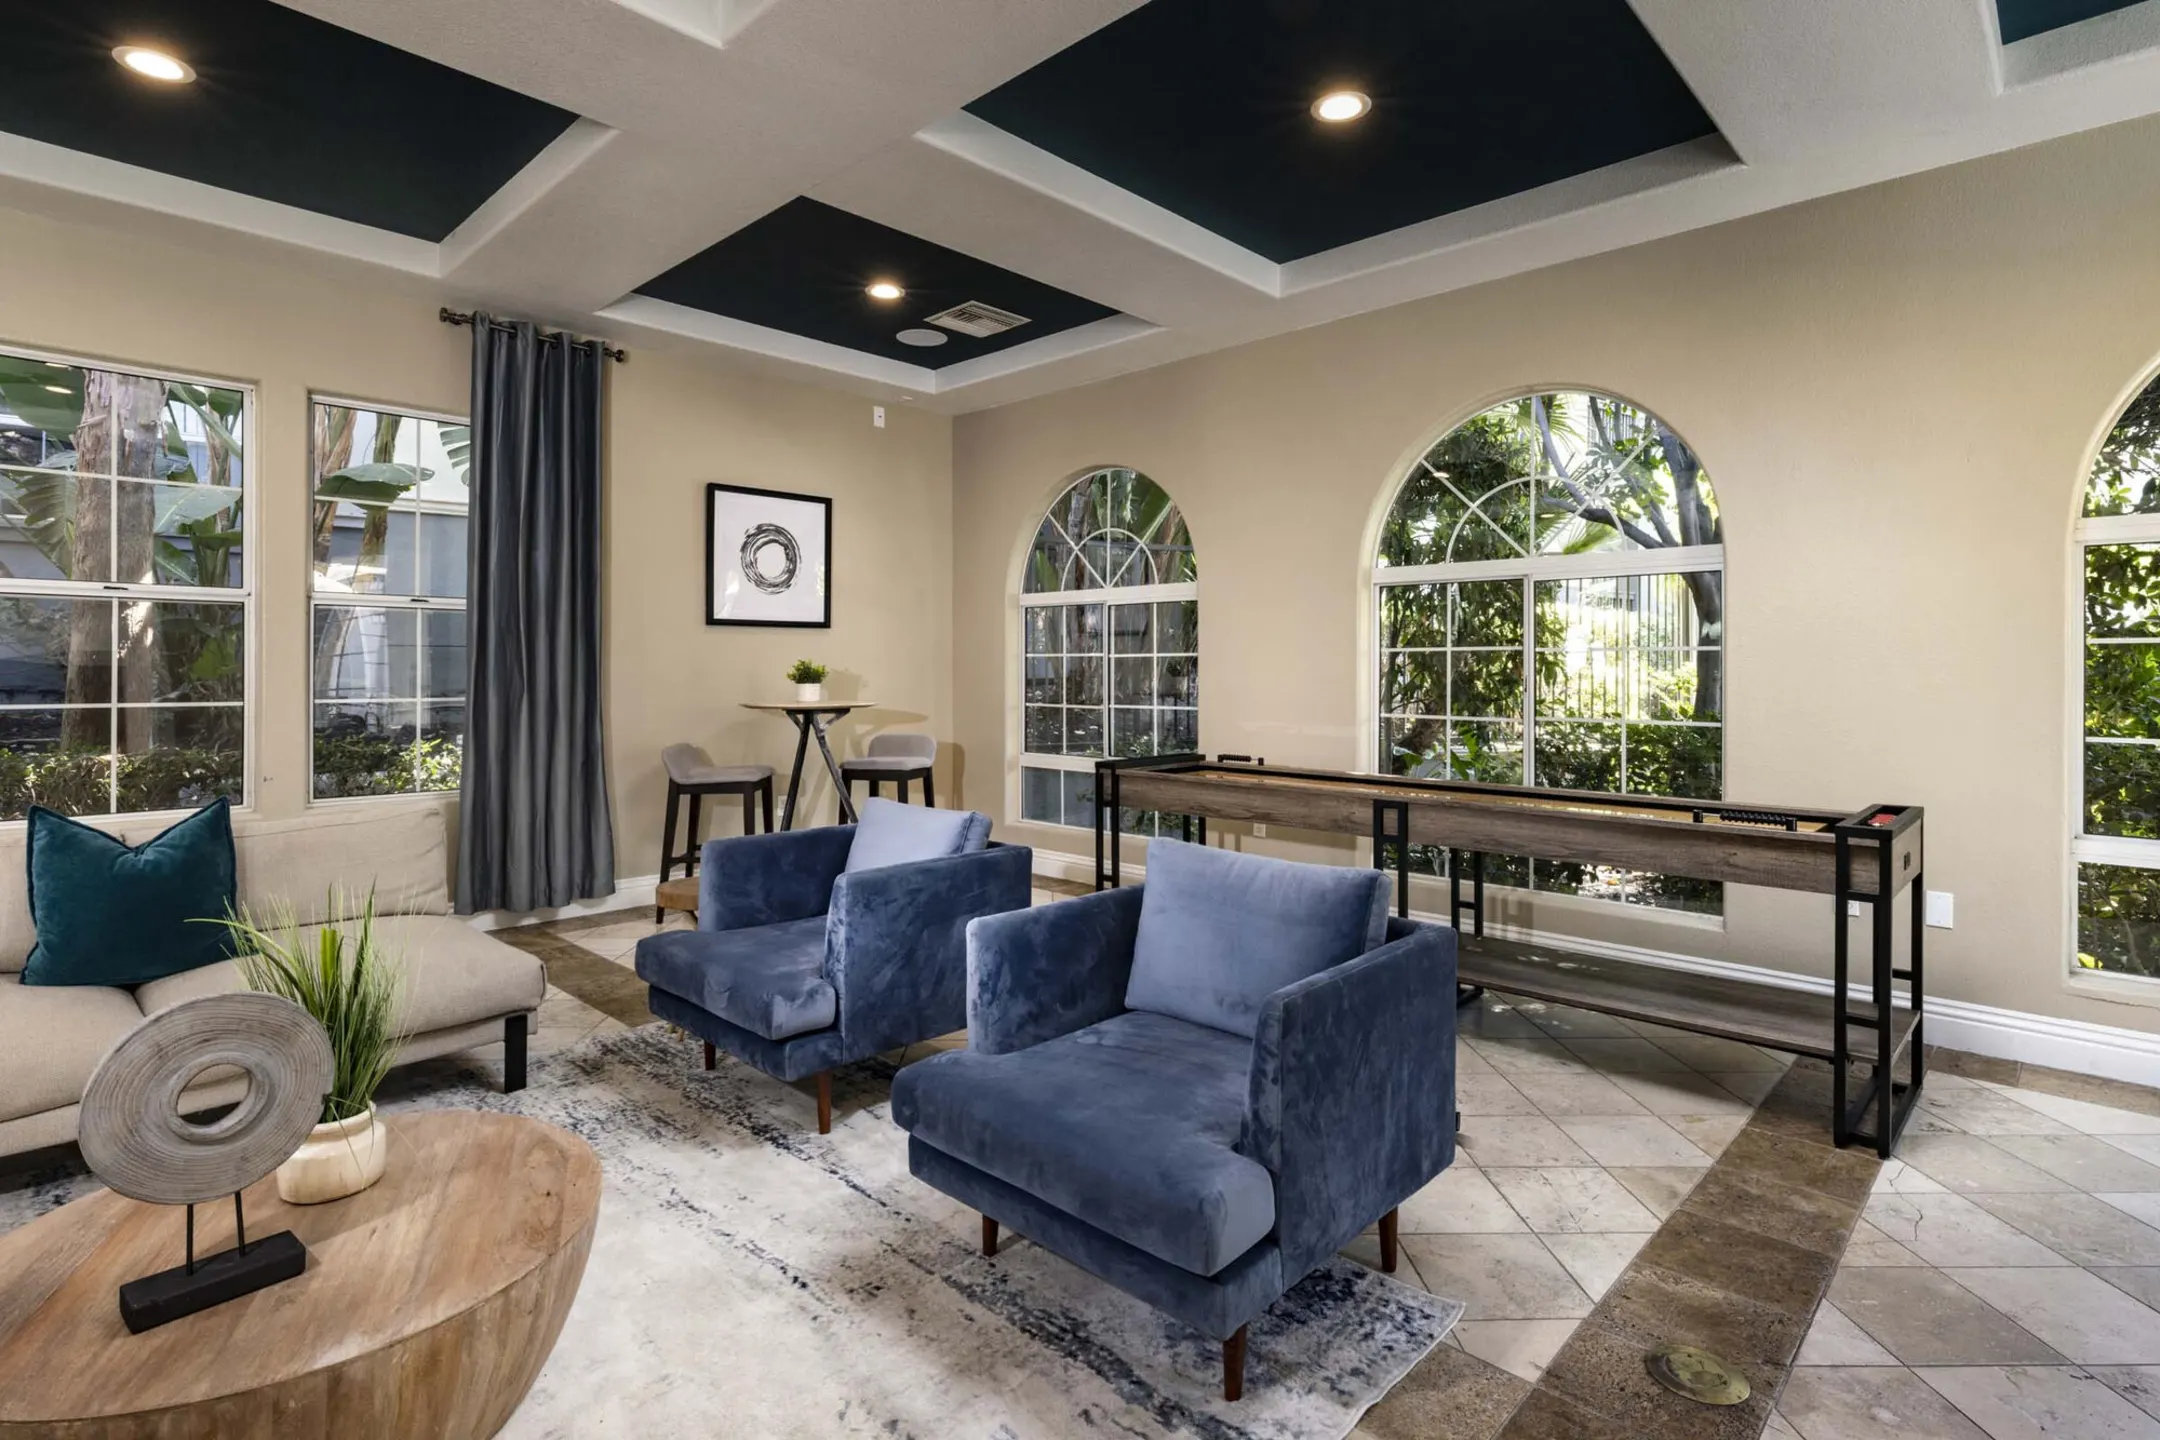 Living Room - Camden Crown Valley - Mission Viejo, CA